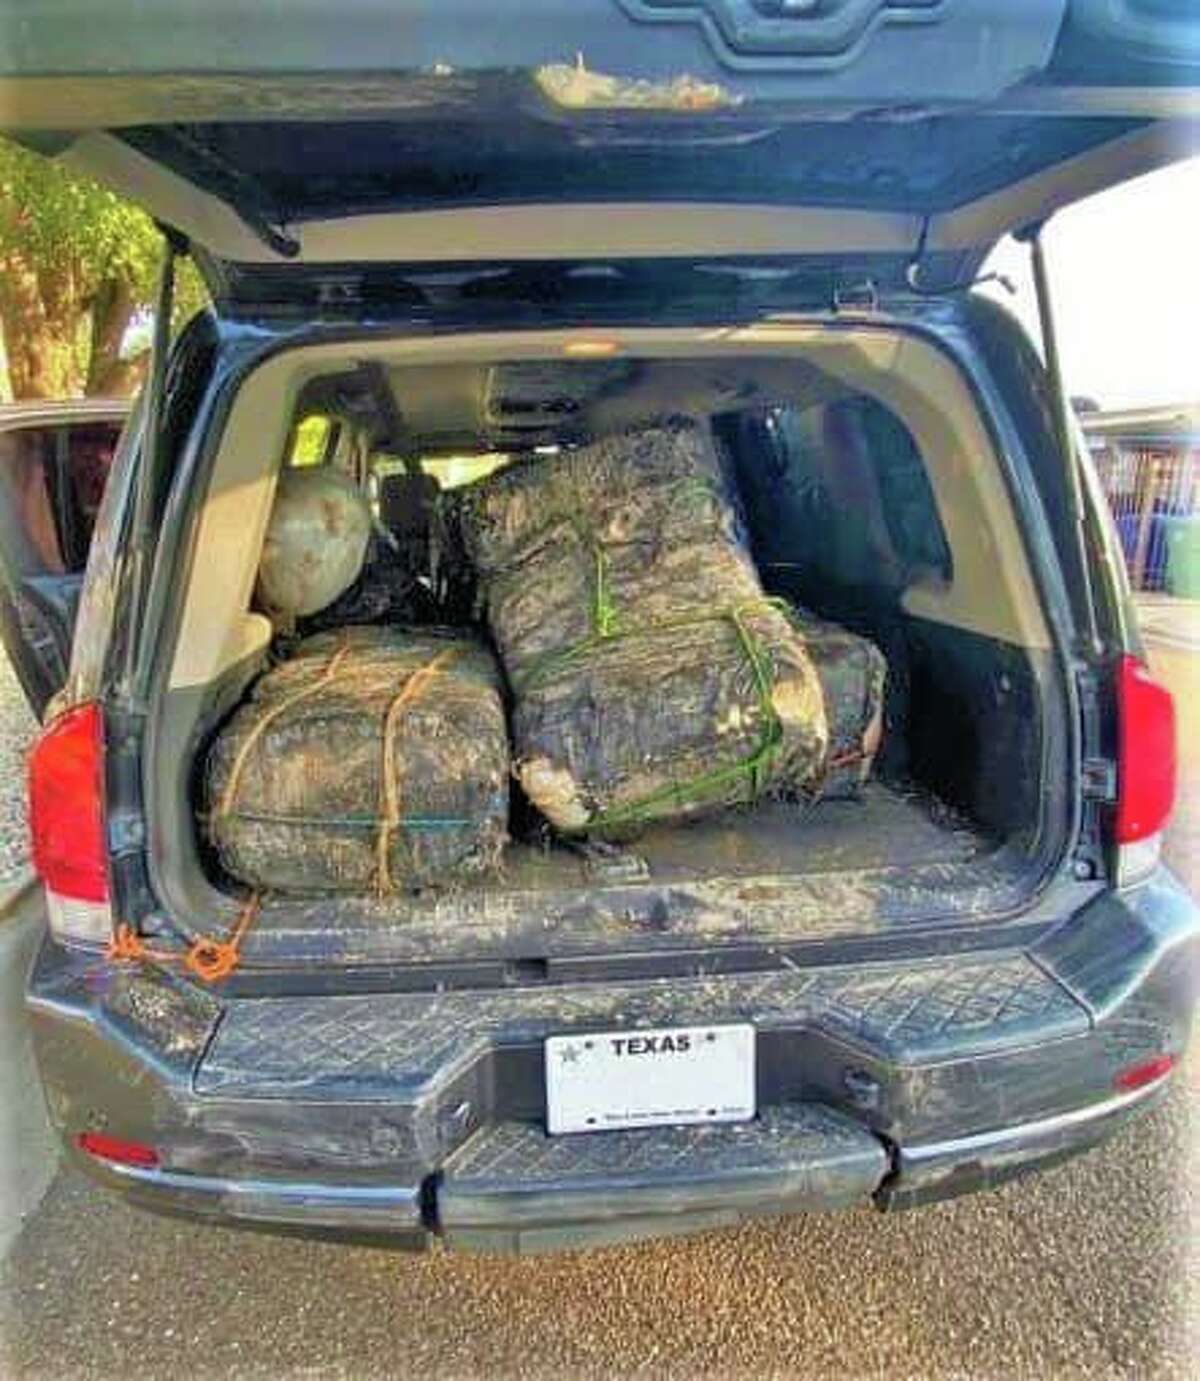 U.S. Border Patrol said this vehicle loaded with approximately $381,000 in marijuana was abandoned in the parking lot of Father McNaboe Park. The contraband weighed 477.3 pounds.